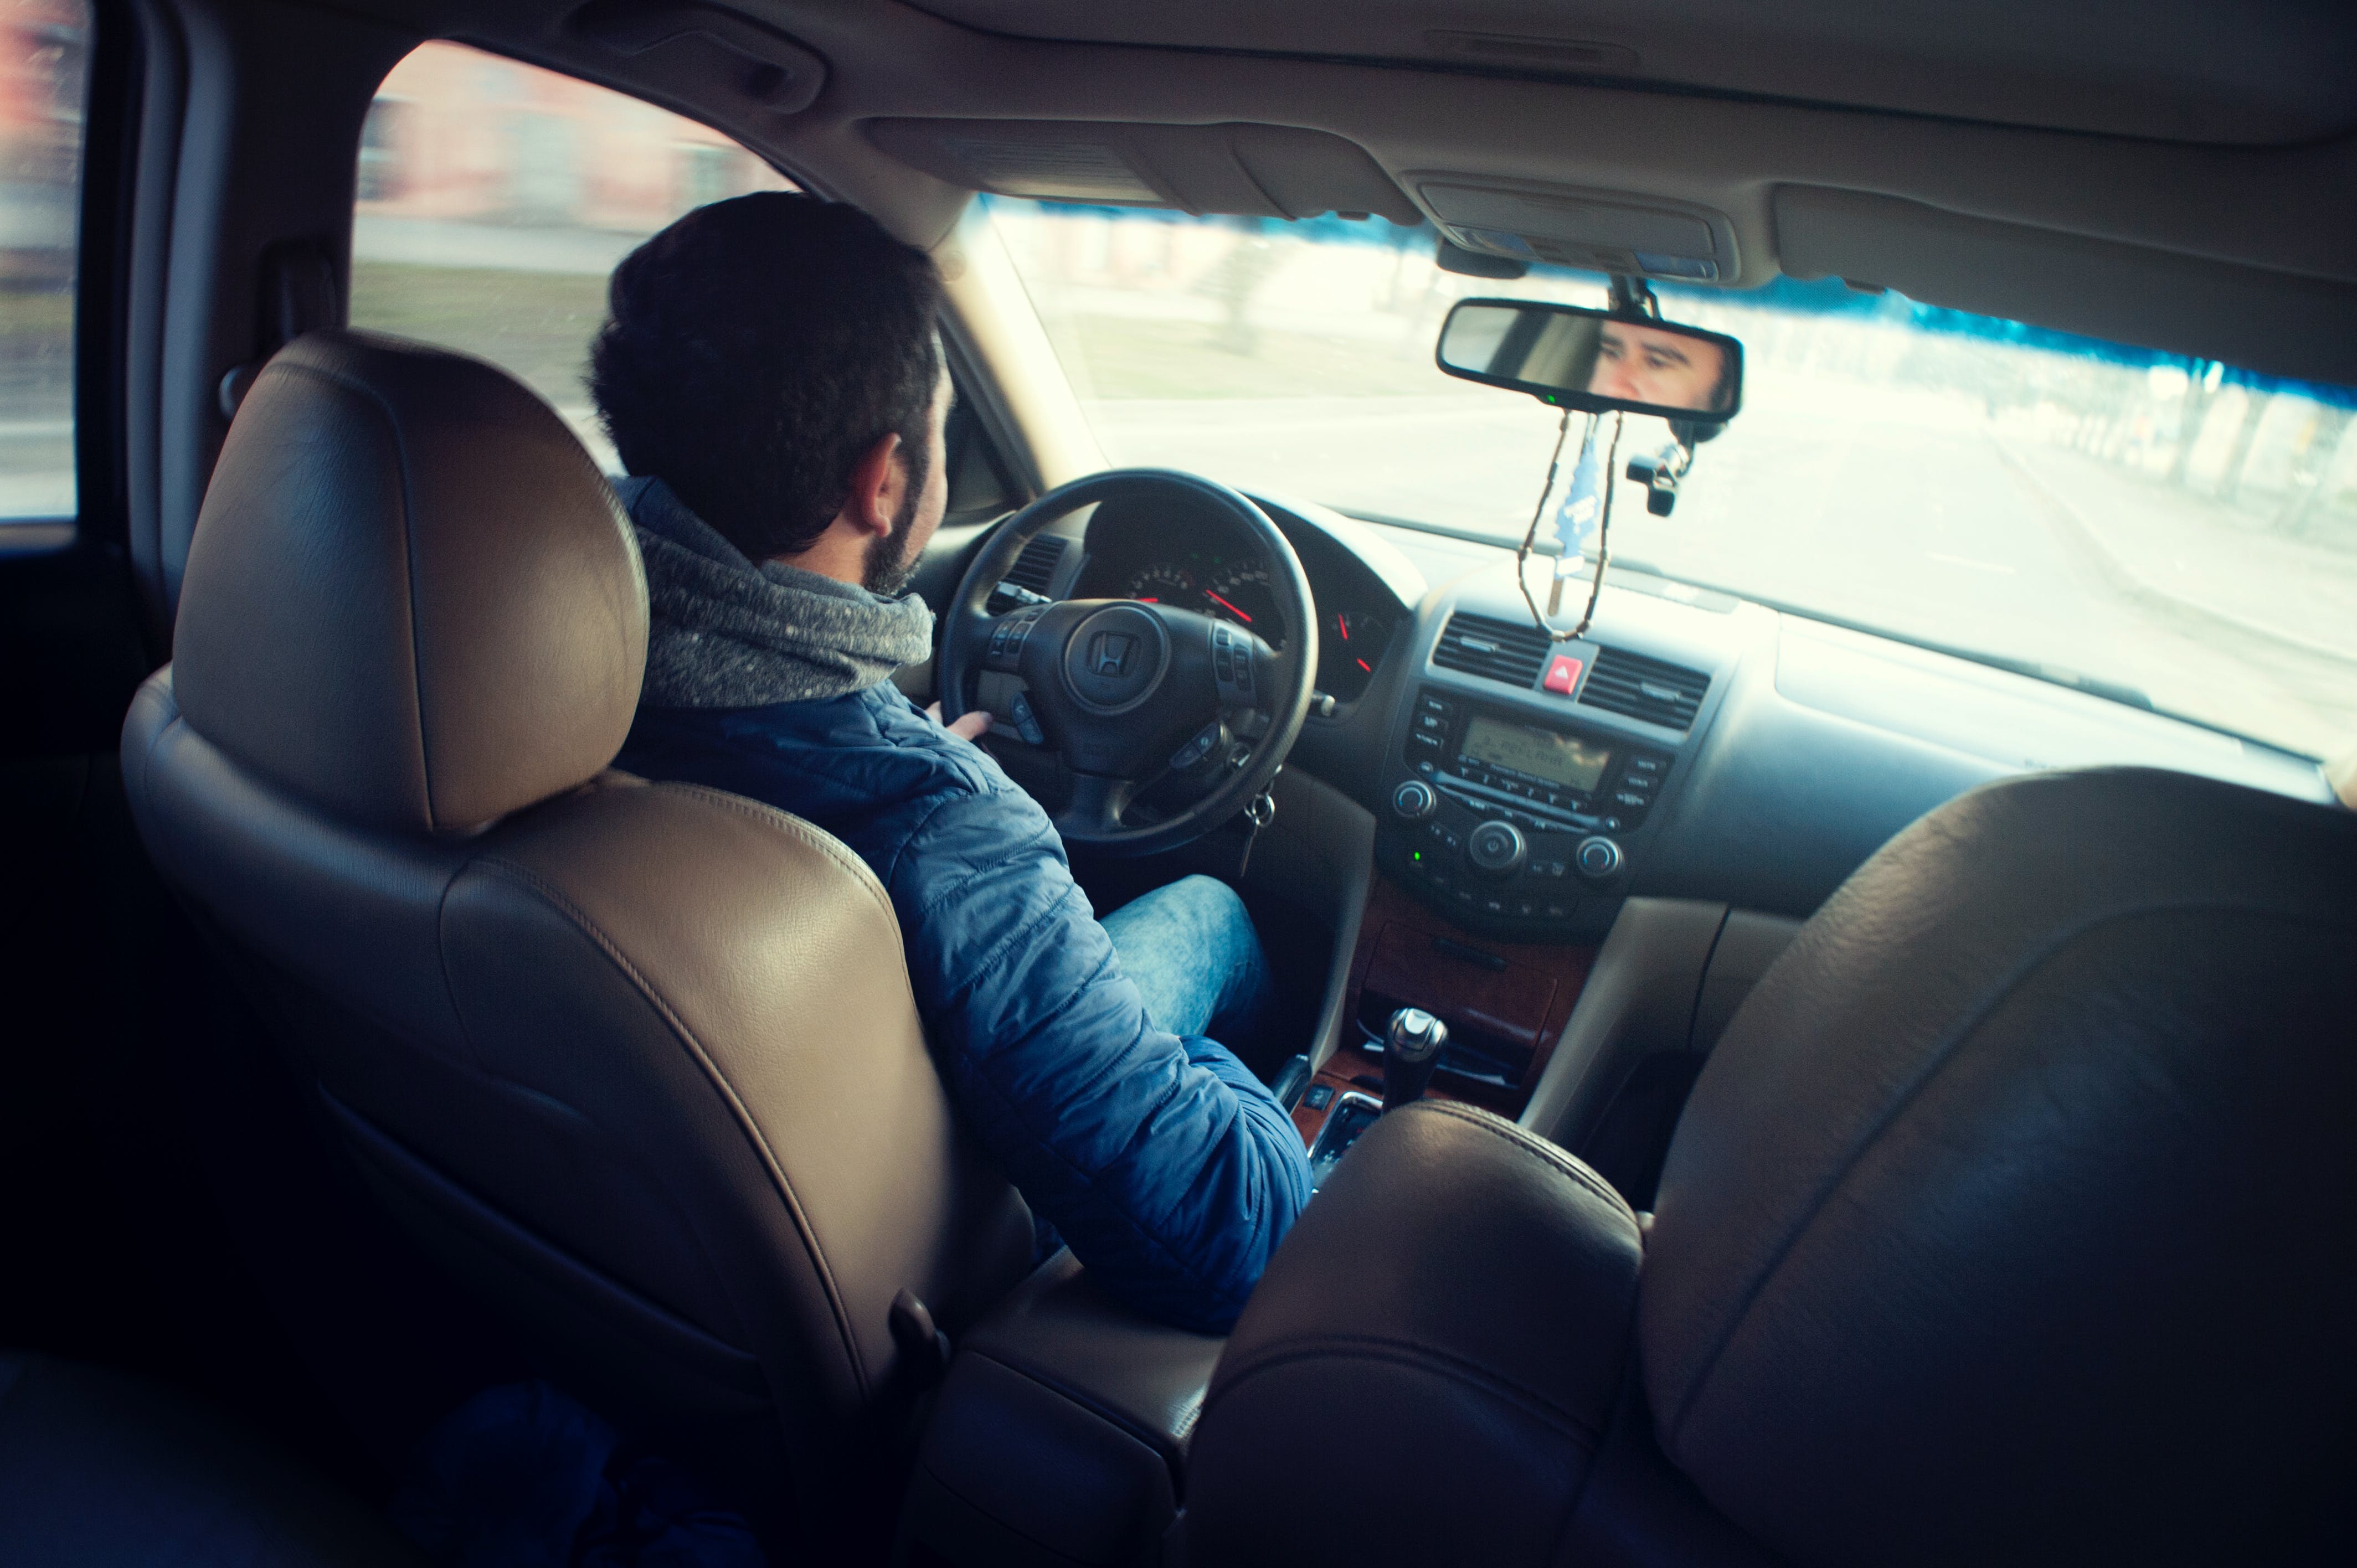 A driving by himself | Source: Pexels